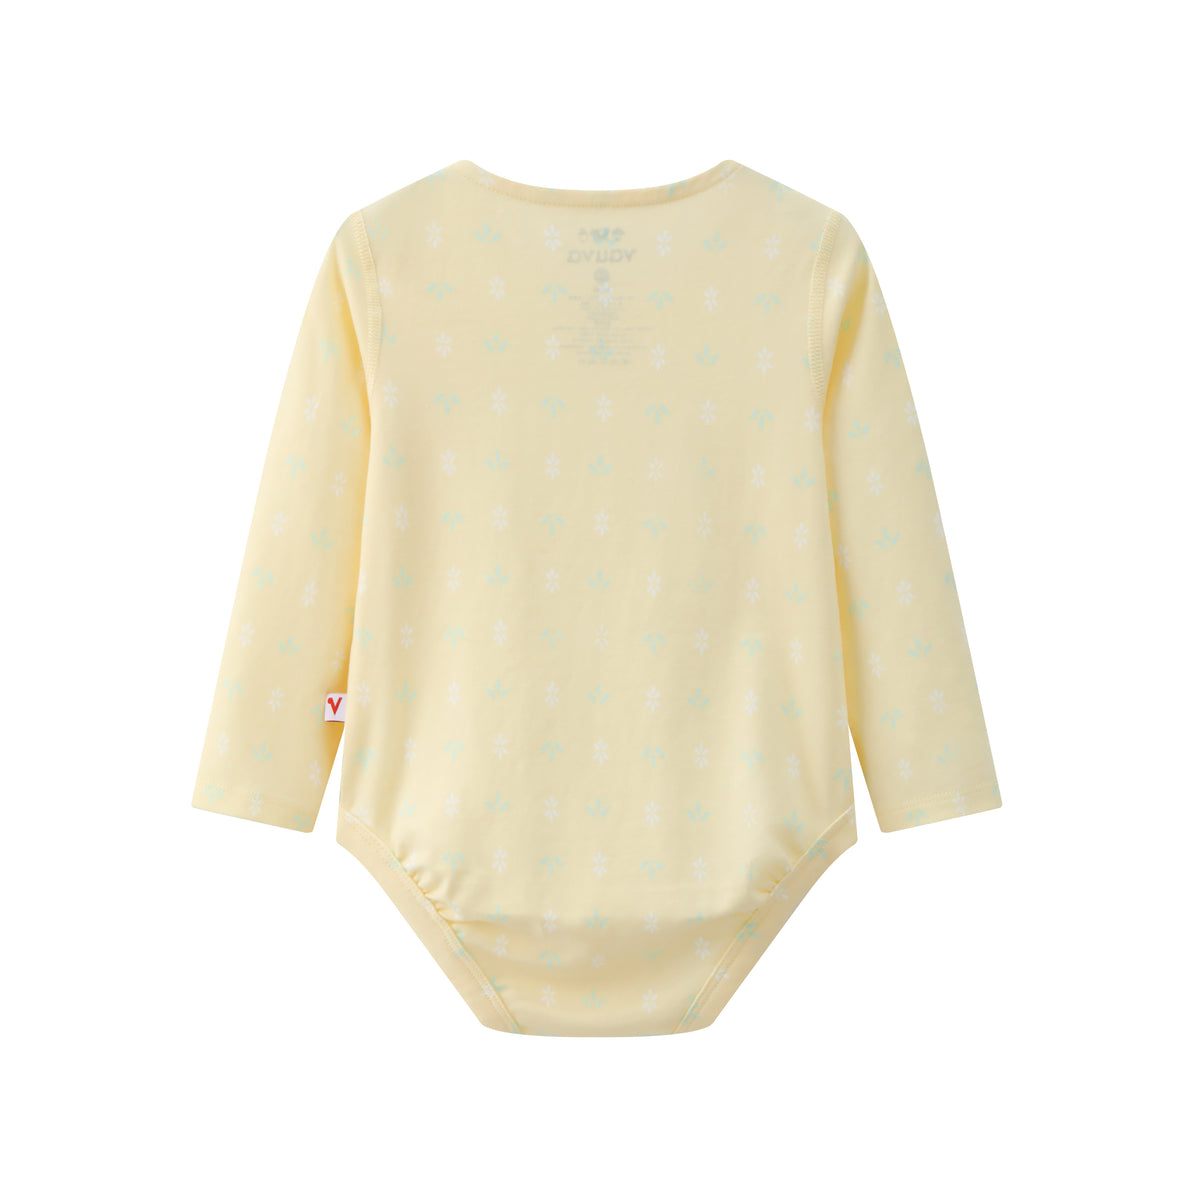 Vauva BBNS - Organic Cotton Square Collar Bodysuits (2-pack) product image back -02